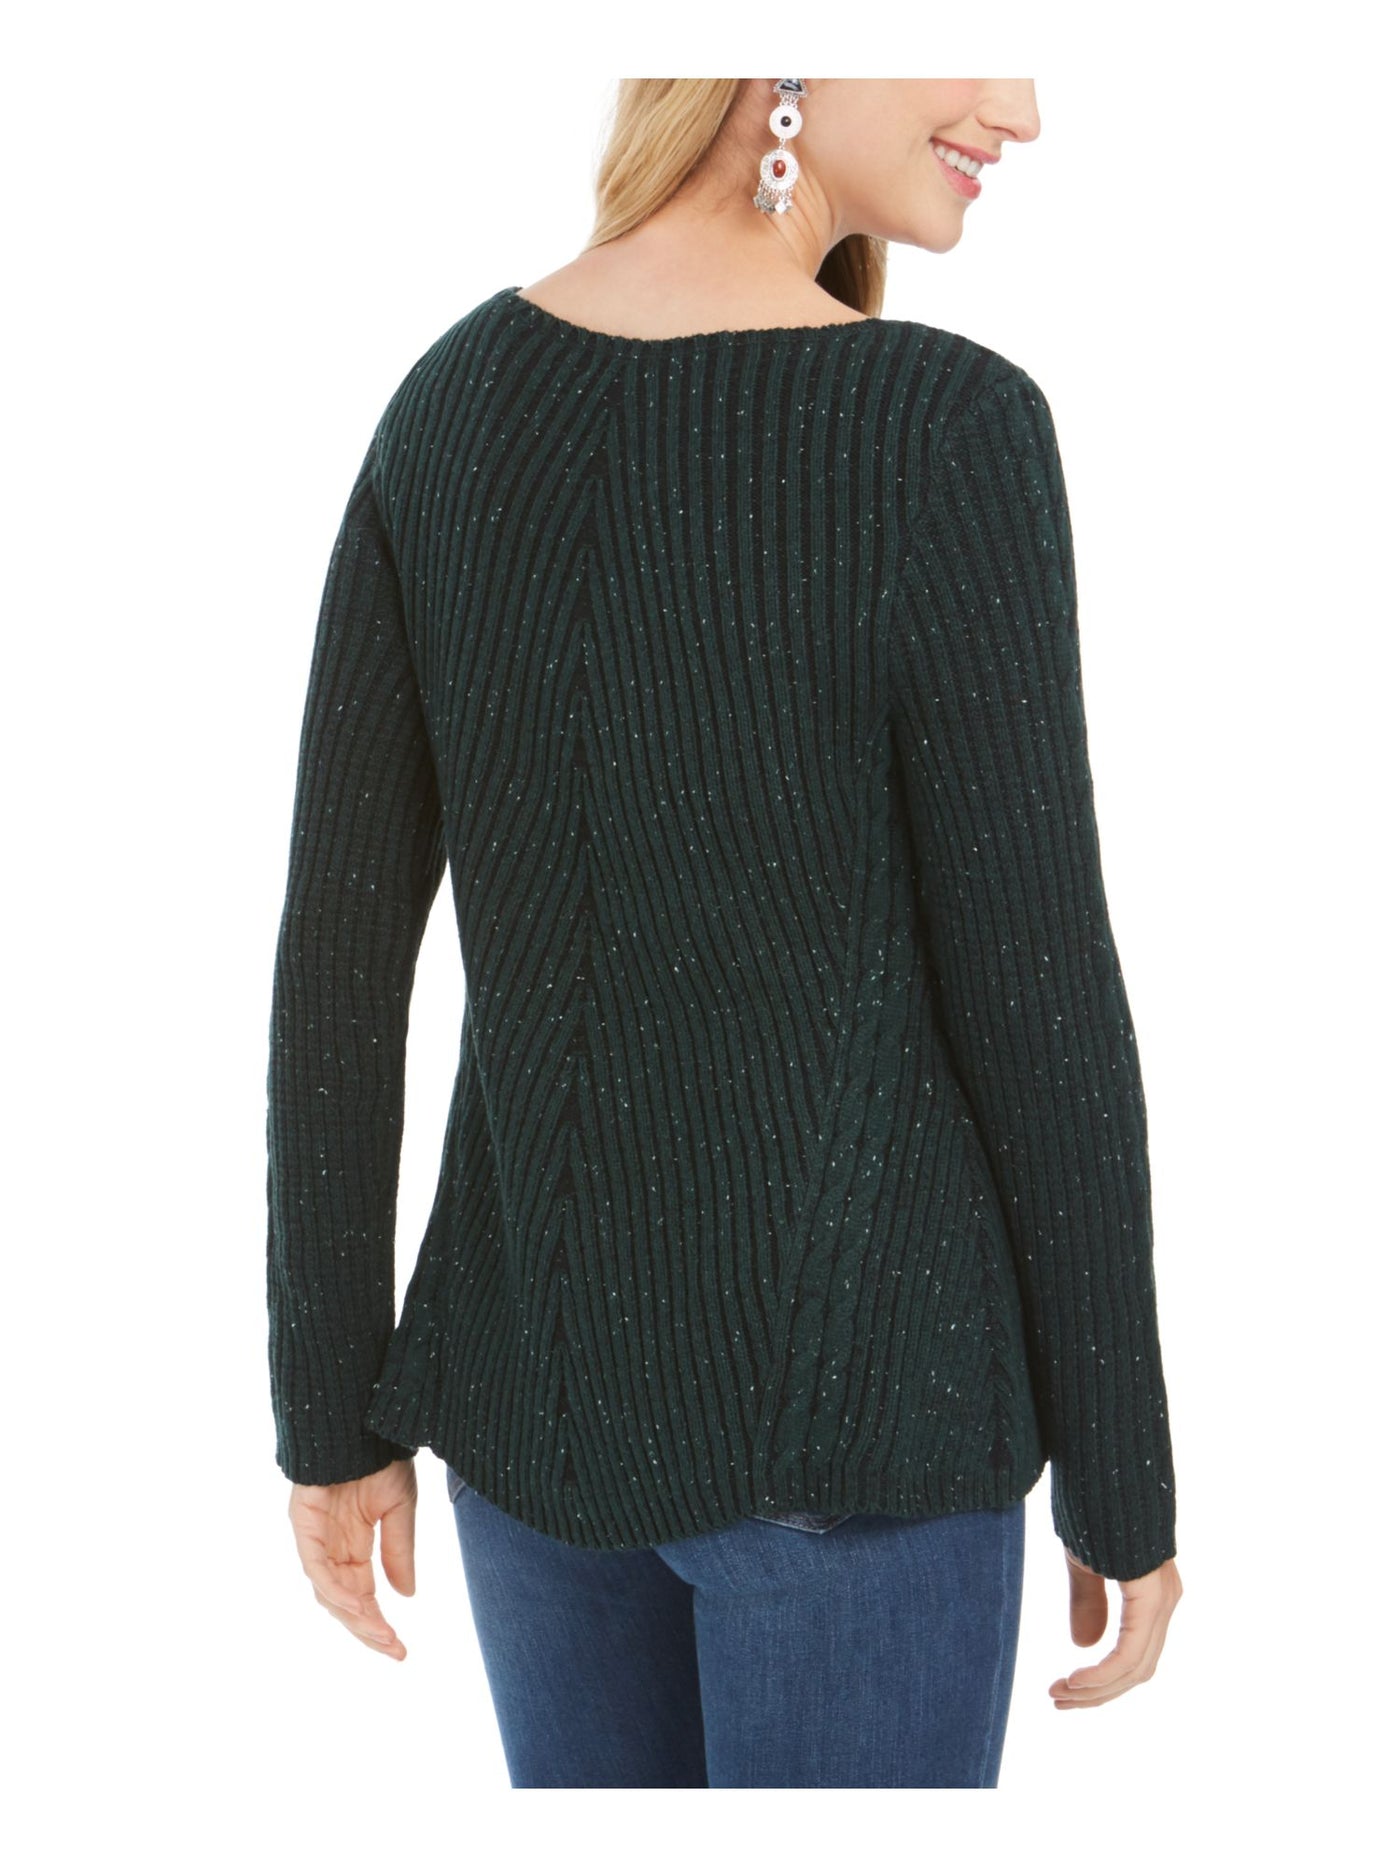 STYLE & COMPANY Womens Green Textured Speckle Long Sleeve Jewel Neck T-Shirt Petites PP